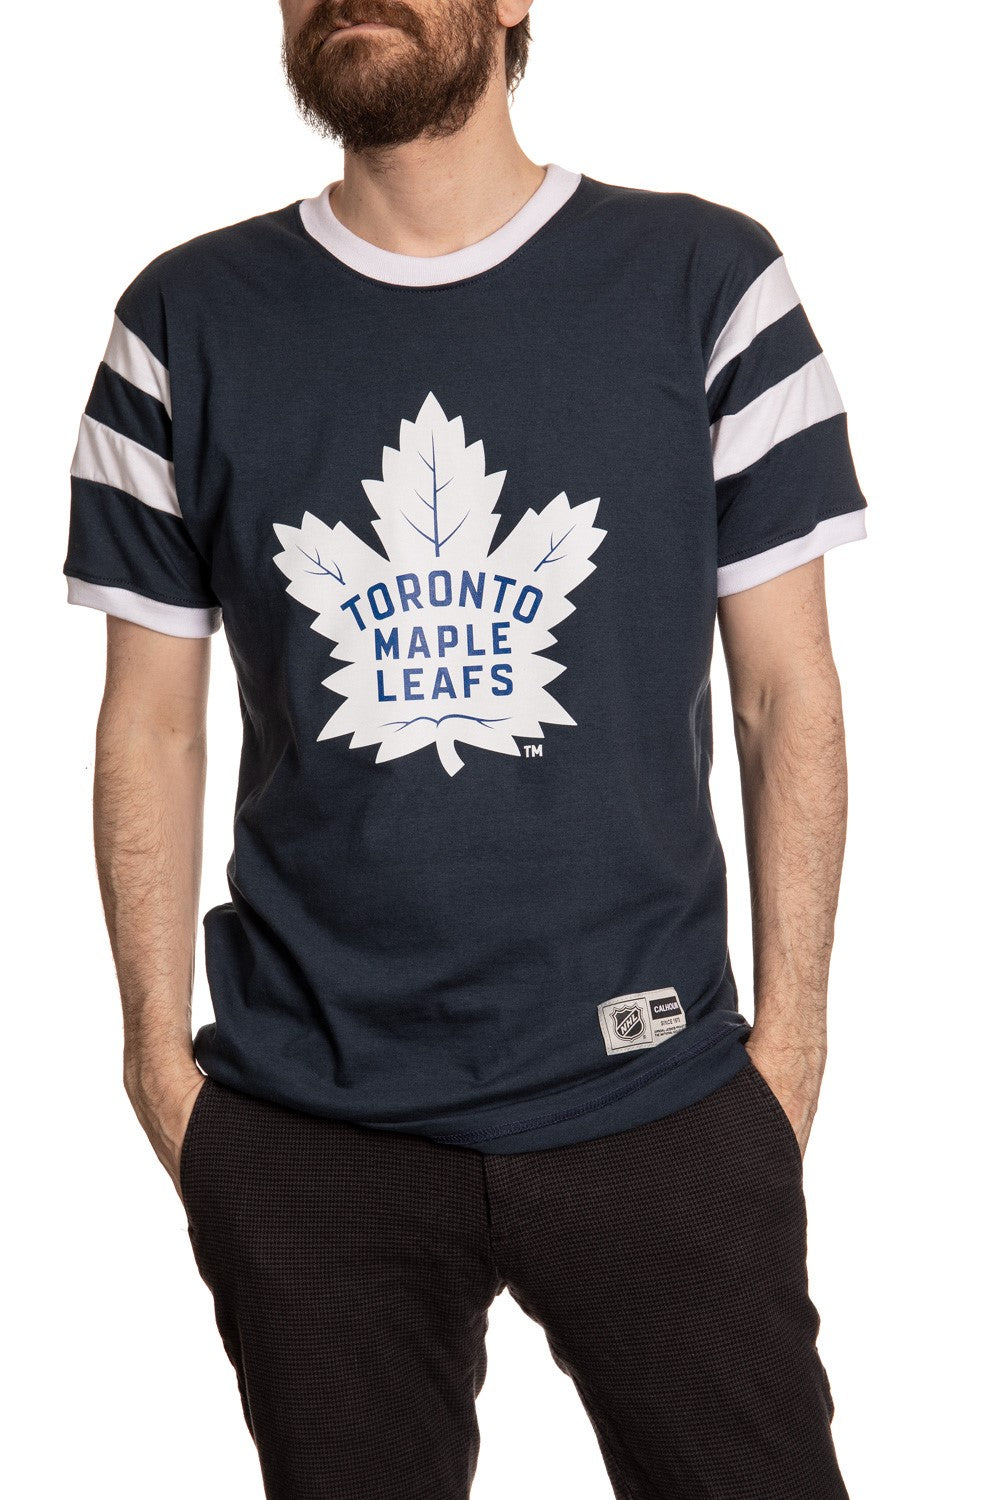 Toronto Maple Leafs Inset Sleeve T-Shirt Front View